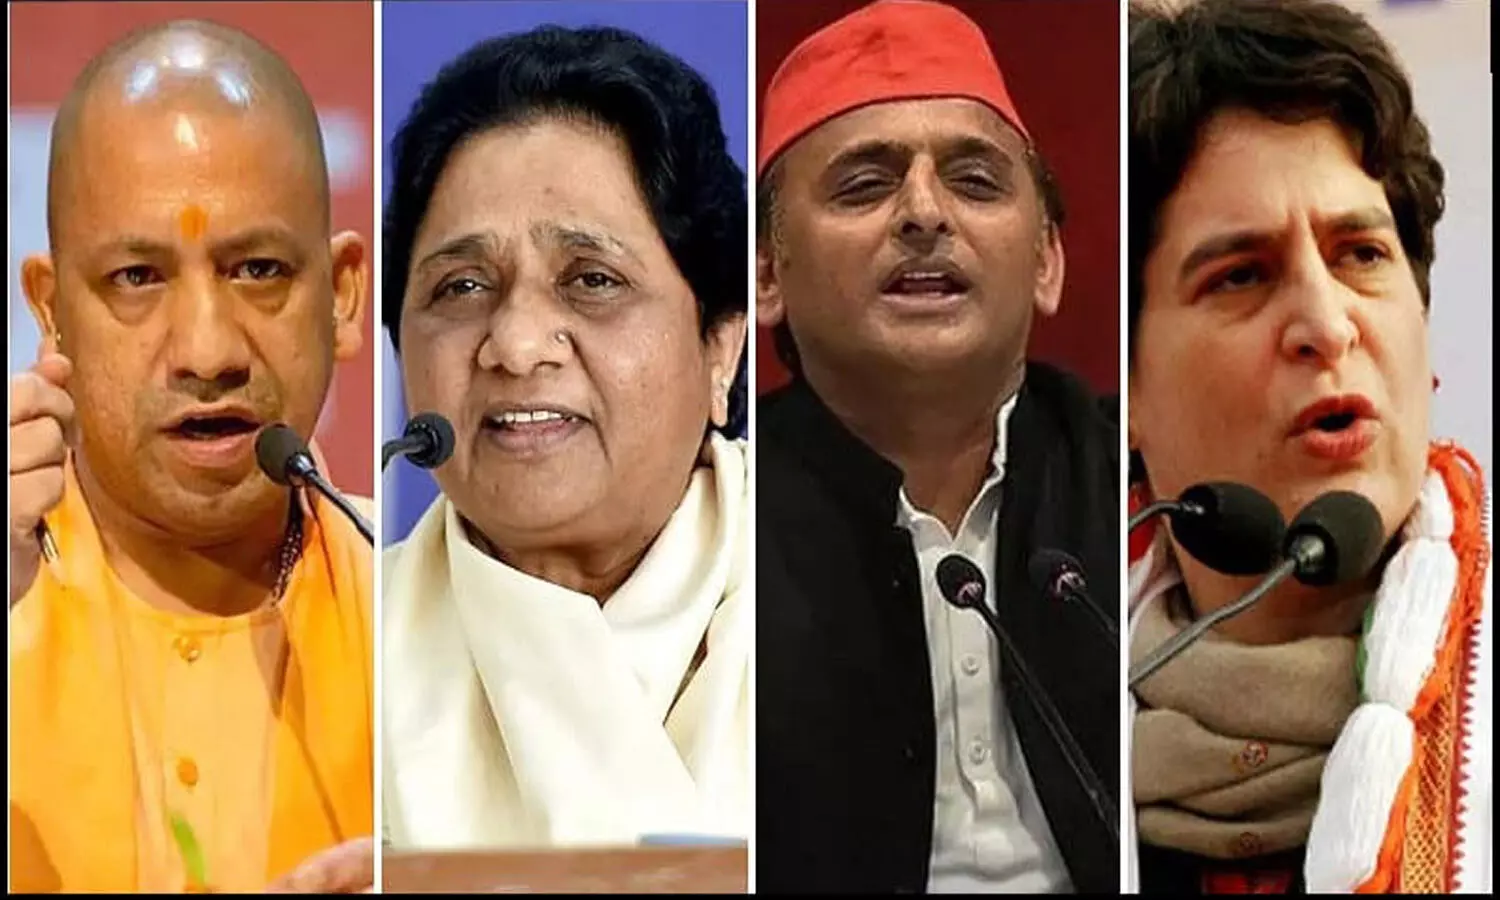 Expectations of the first phase voters in Uttar Pradesh are analyzed today